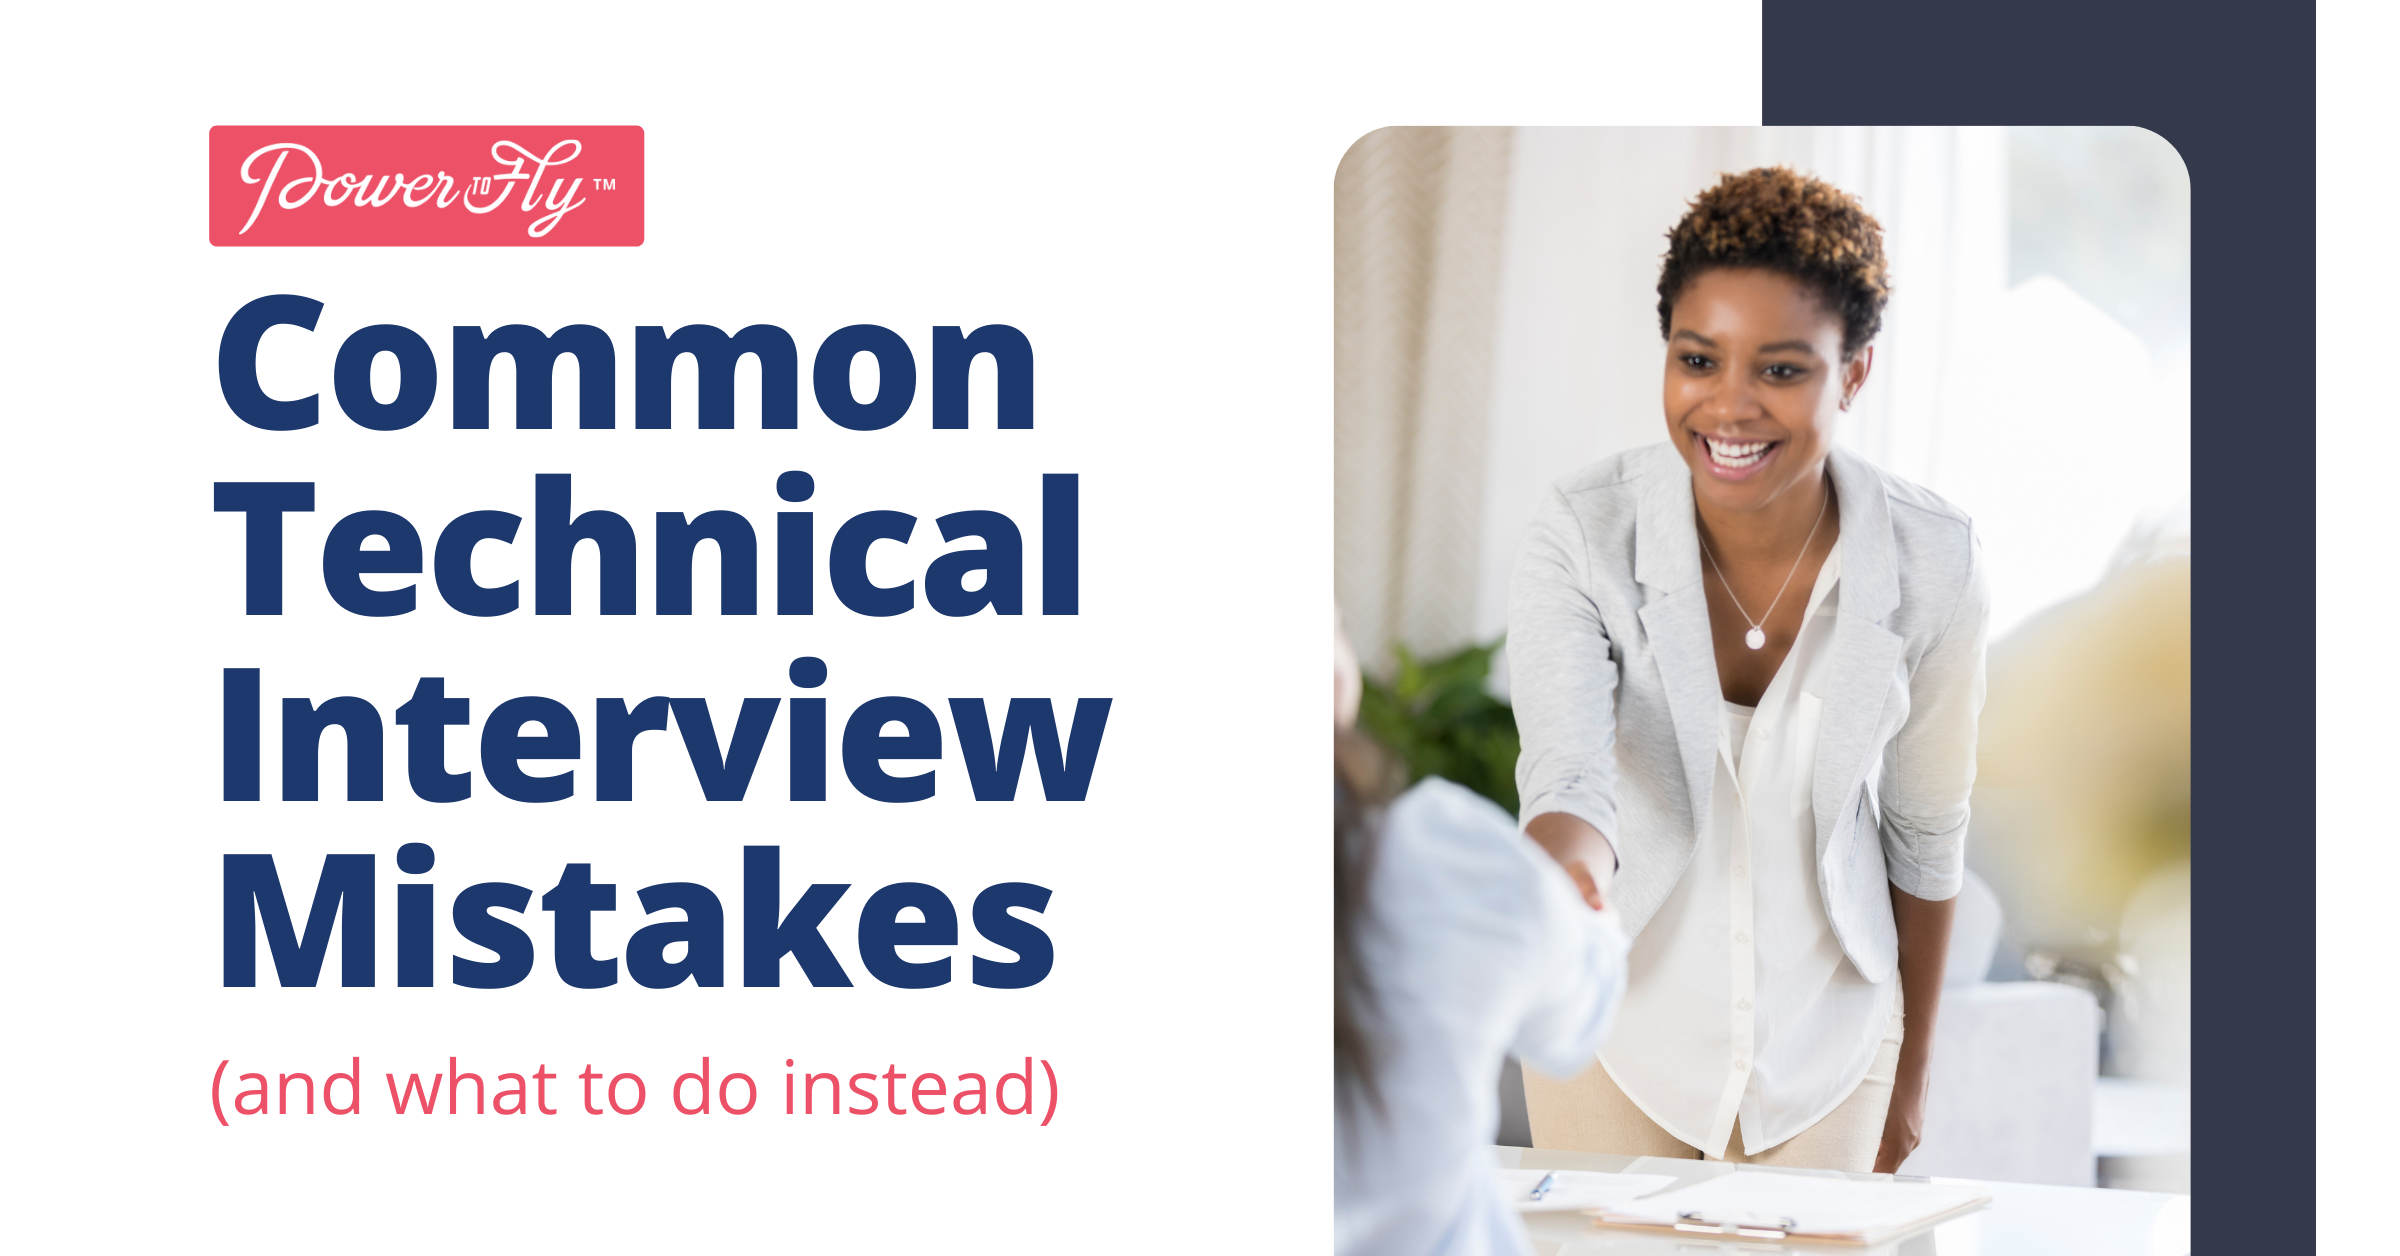 Common Technical Interview Mistakes (and What to Do Instead)